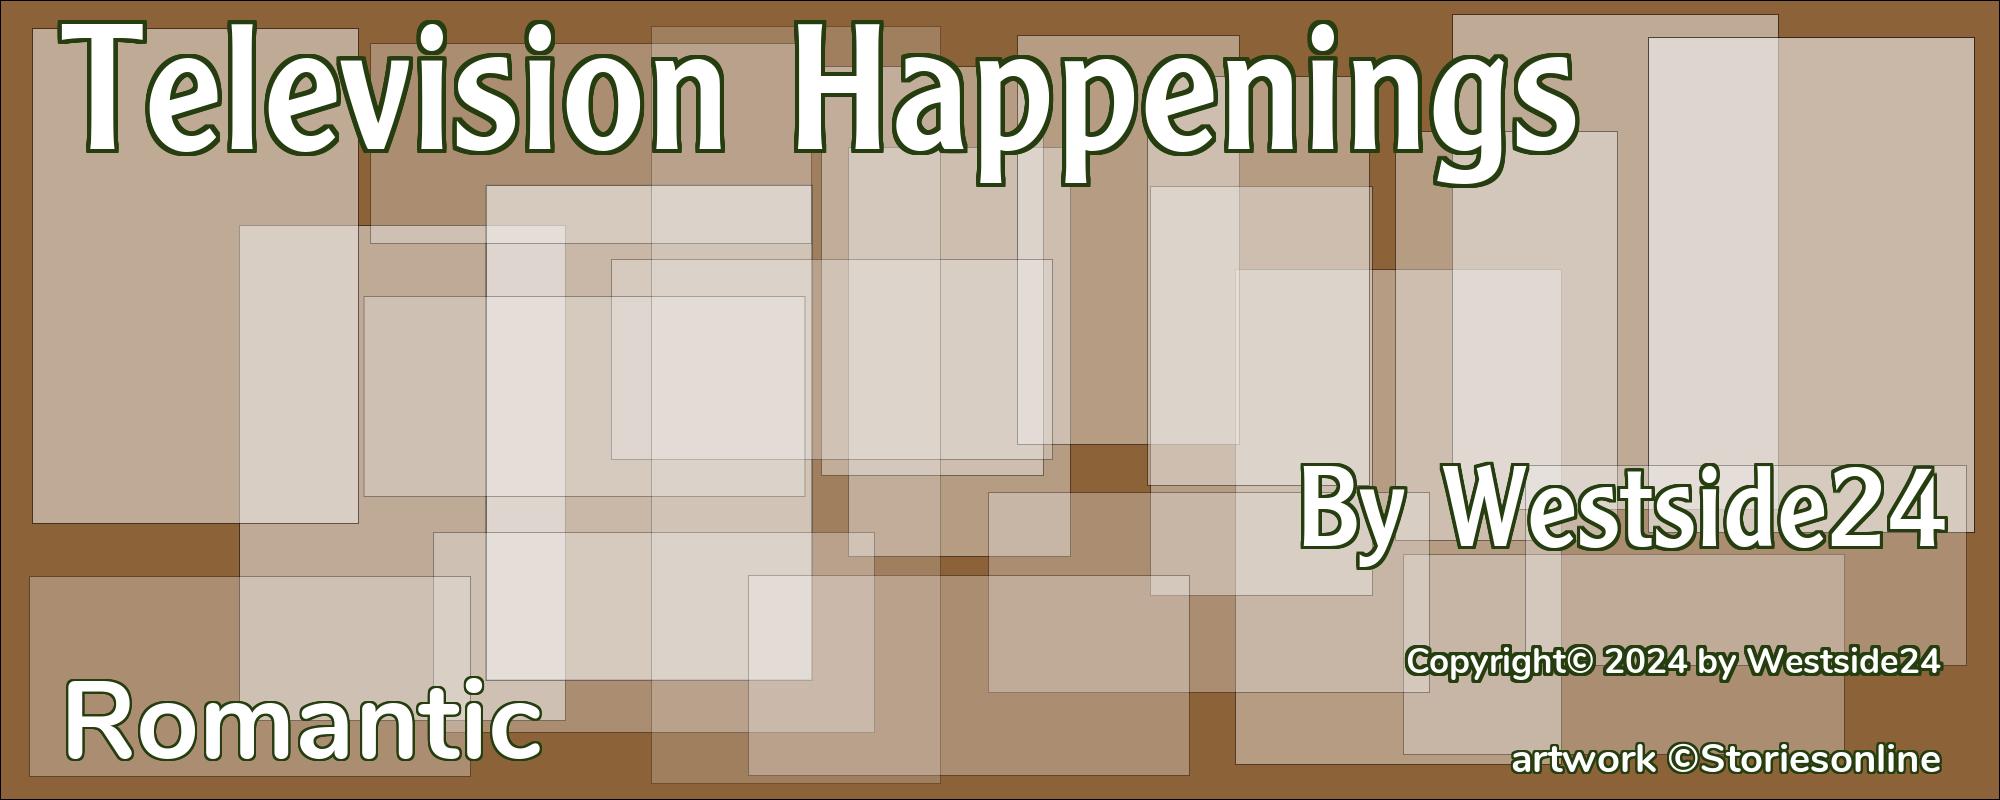 Television Happenings - Cover